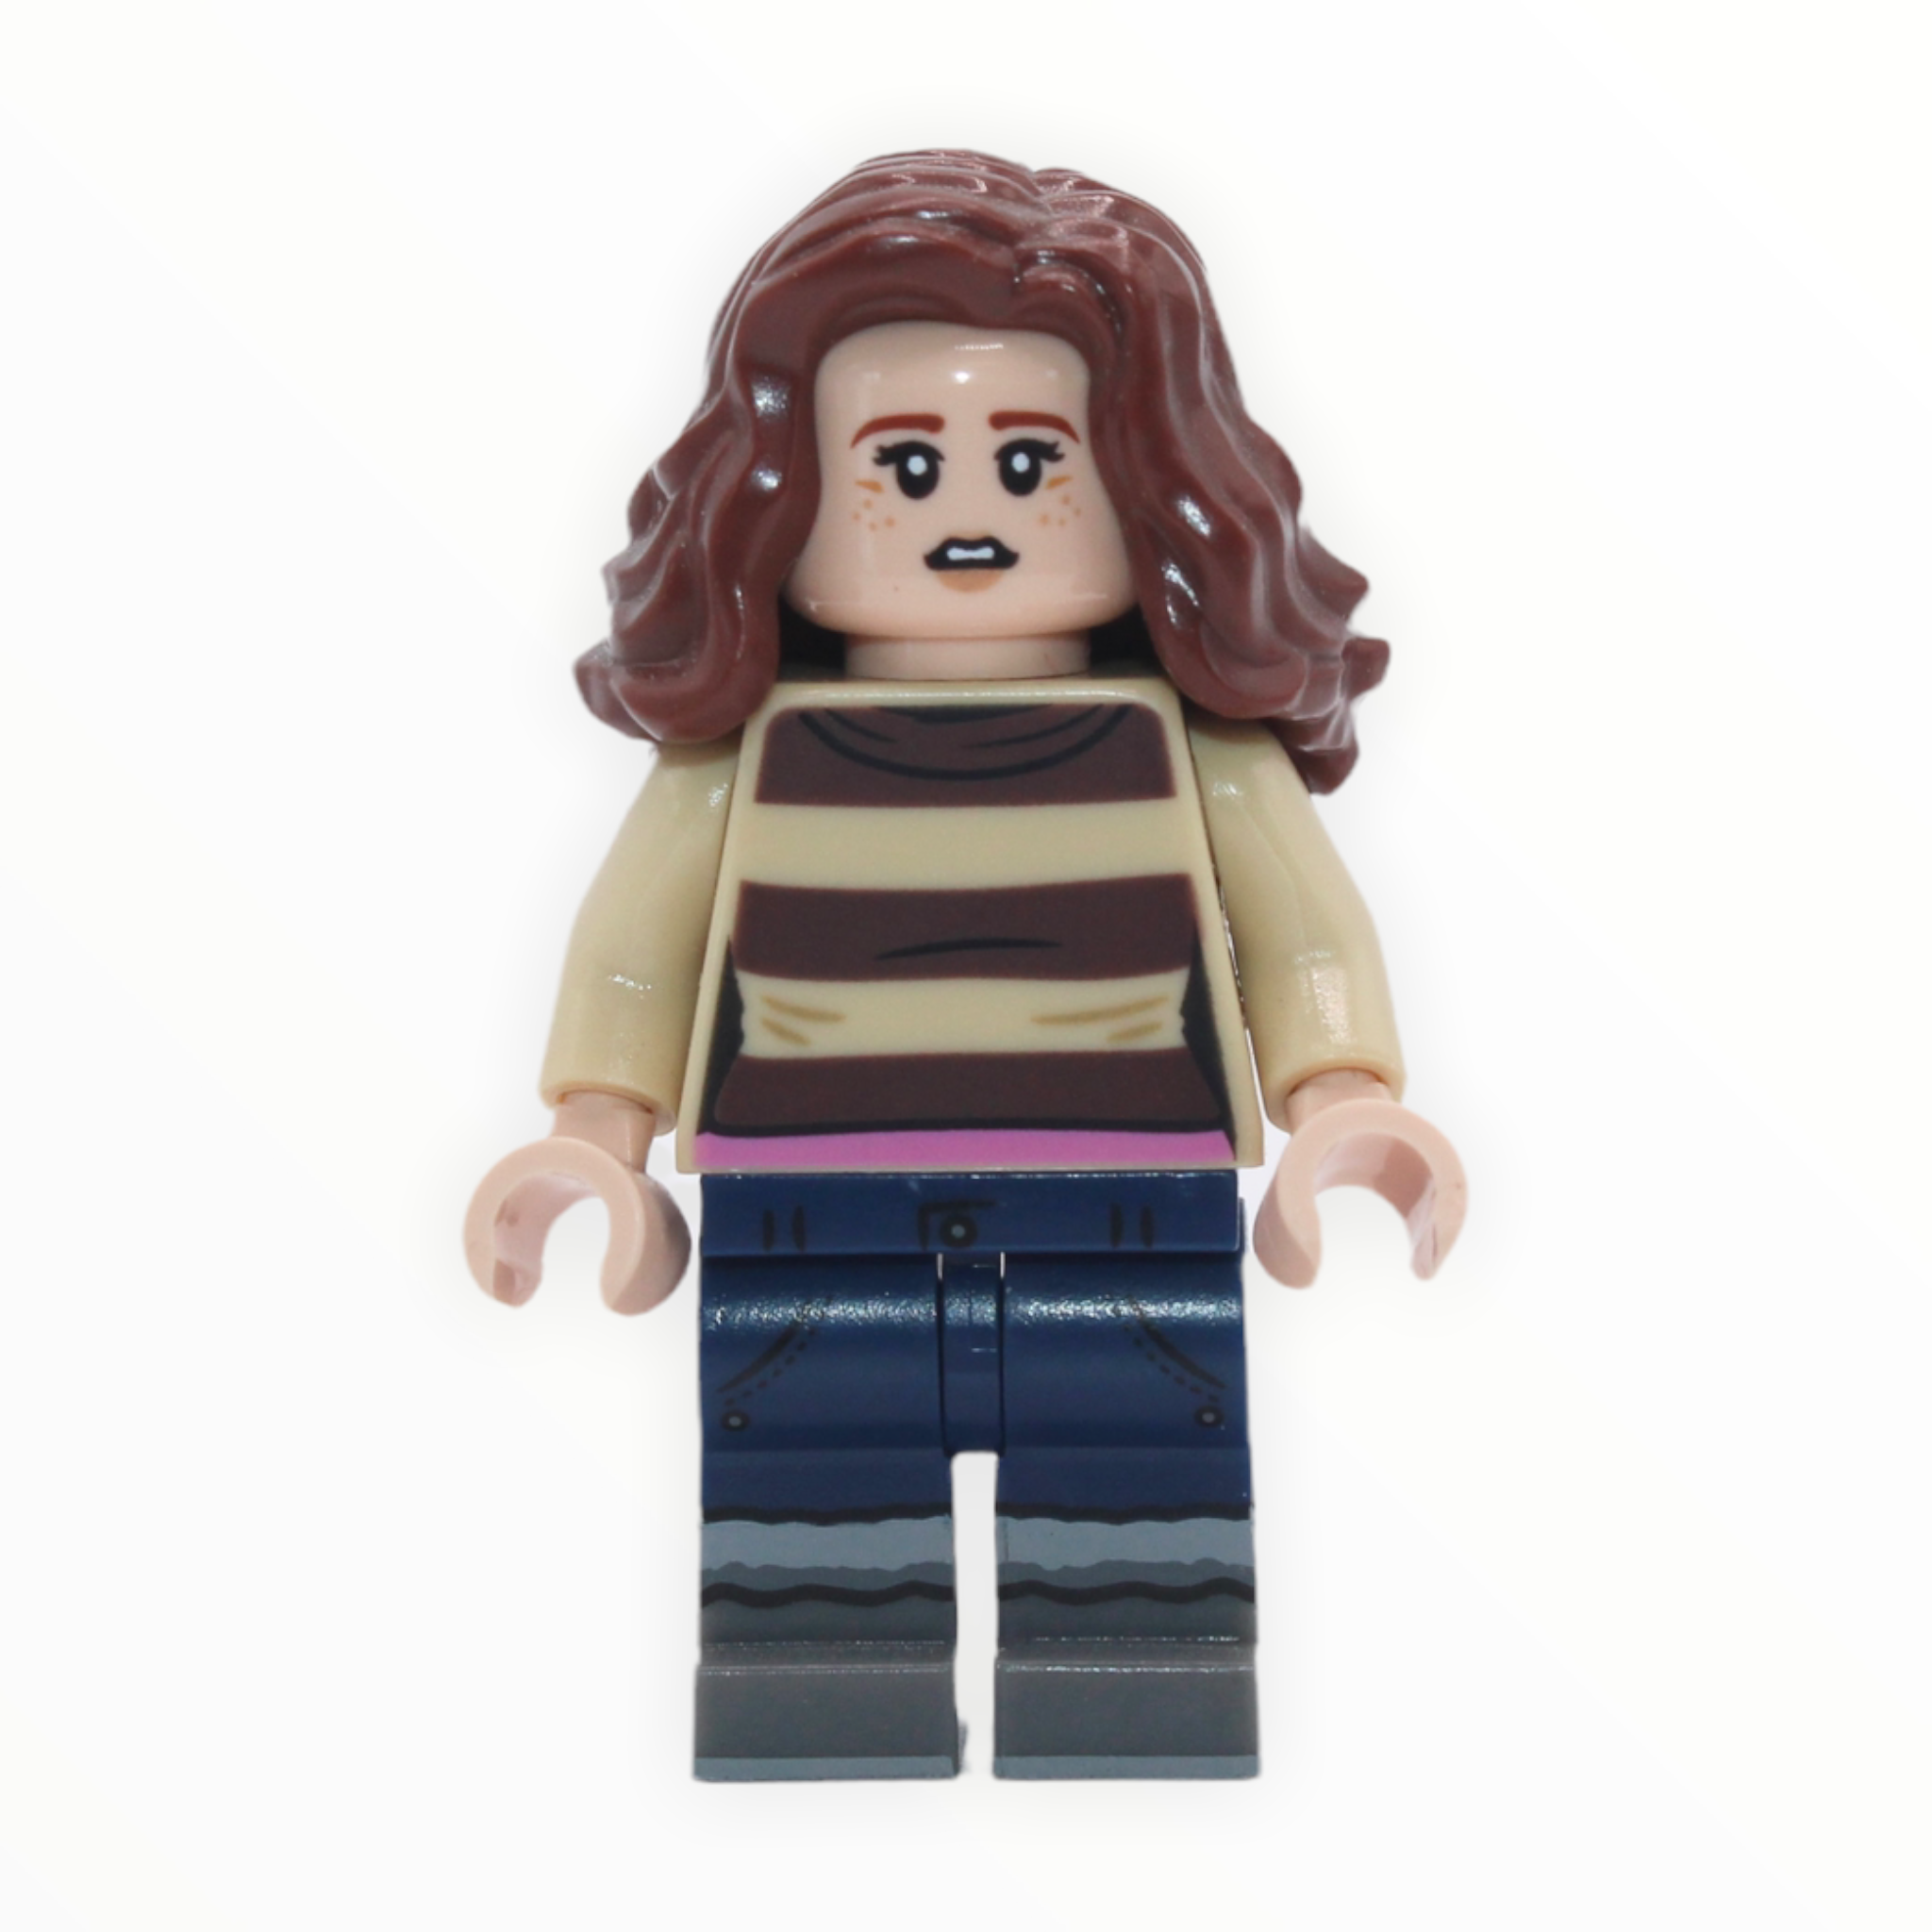 Harry Potter Series 2: Hermione Granger with Butterbeer